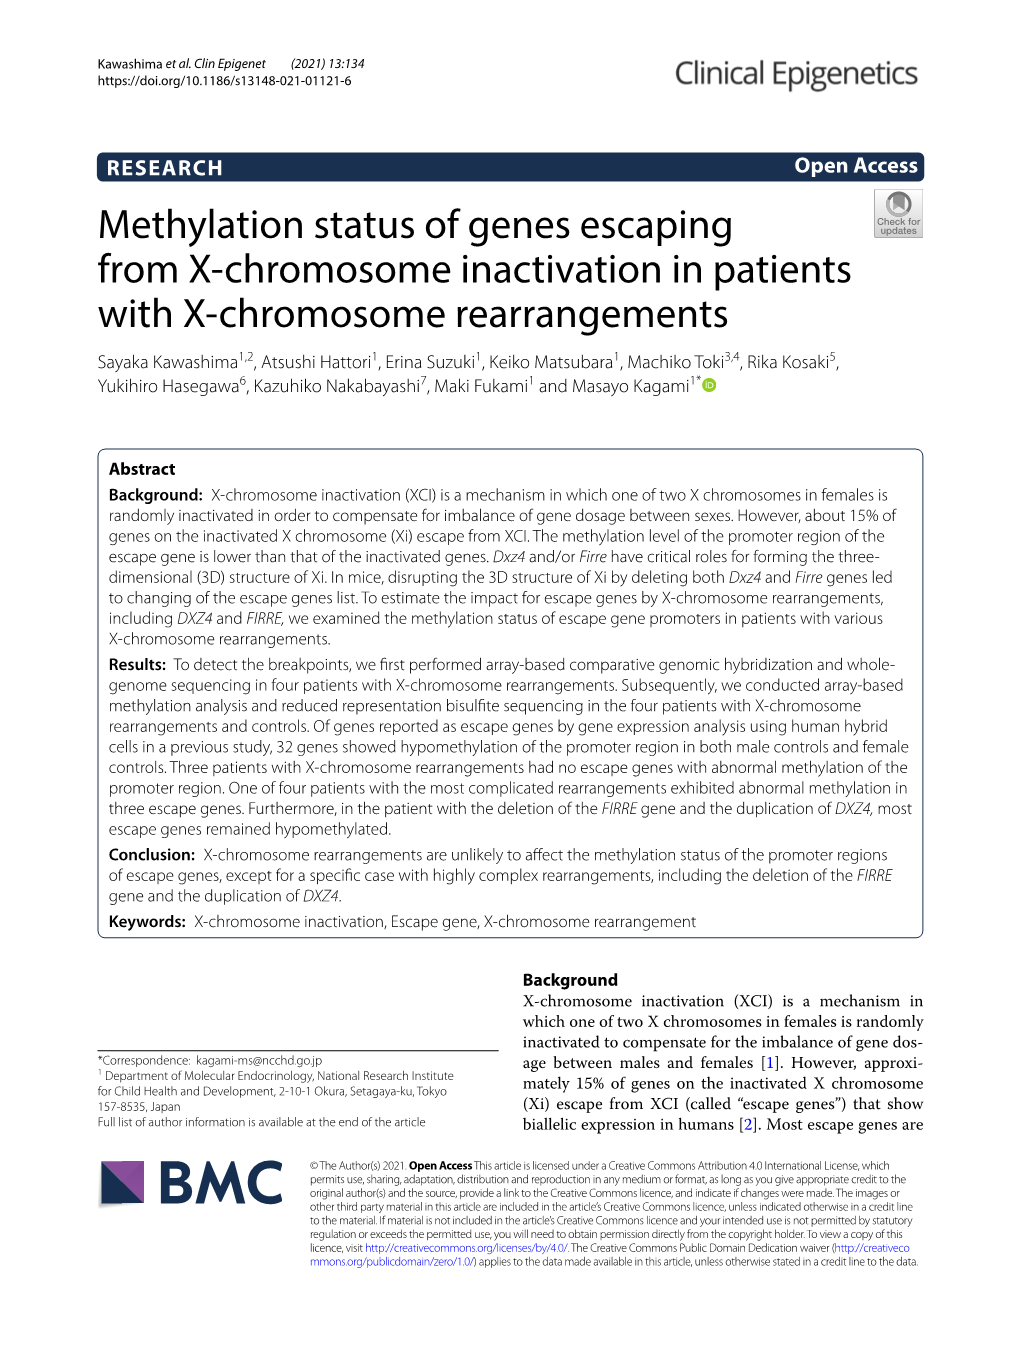 Methylation Status of Genes Escaping from X-Chromosome Inactivation In